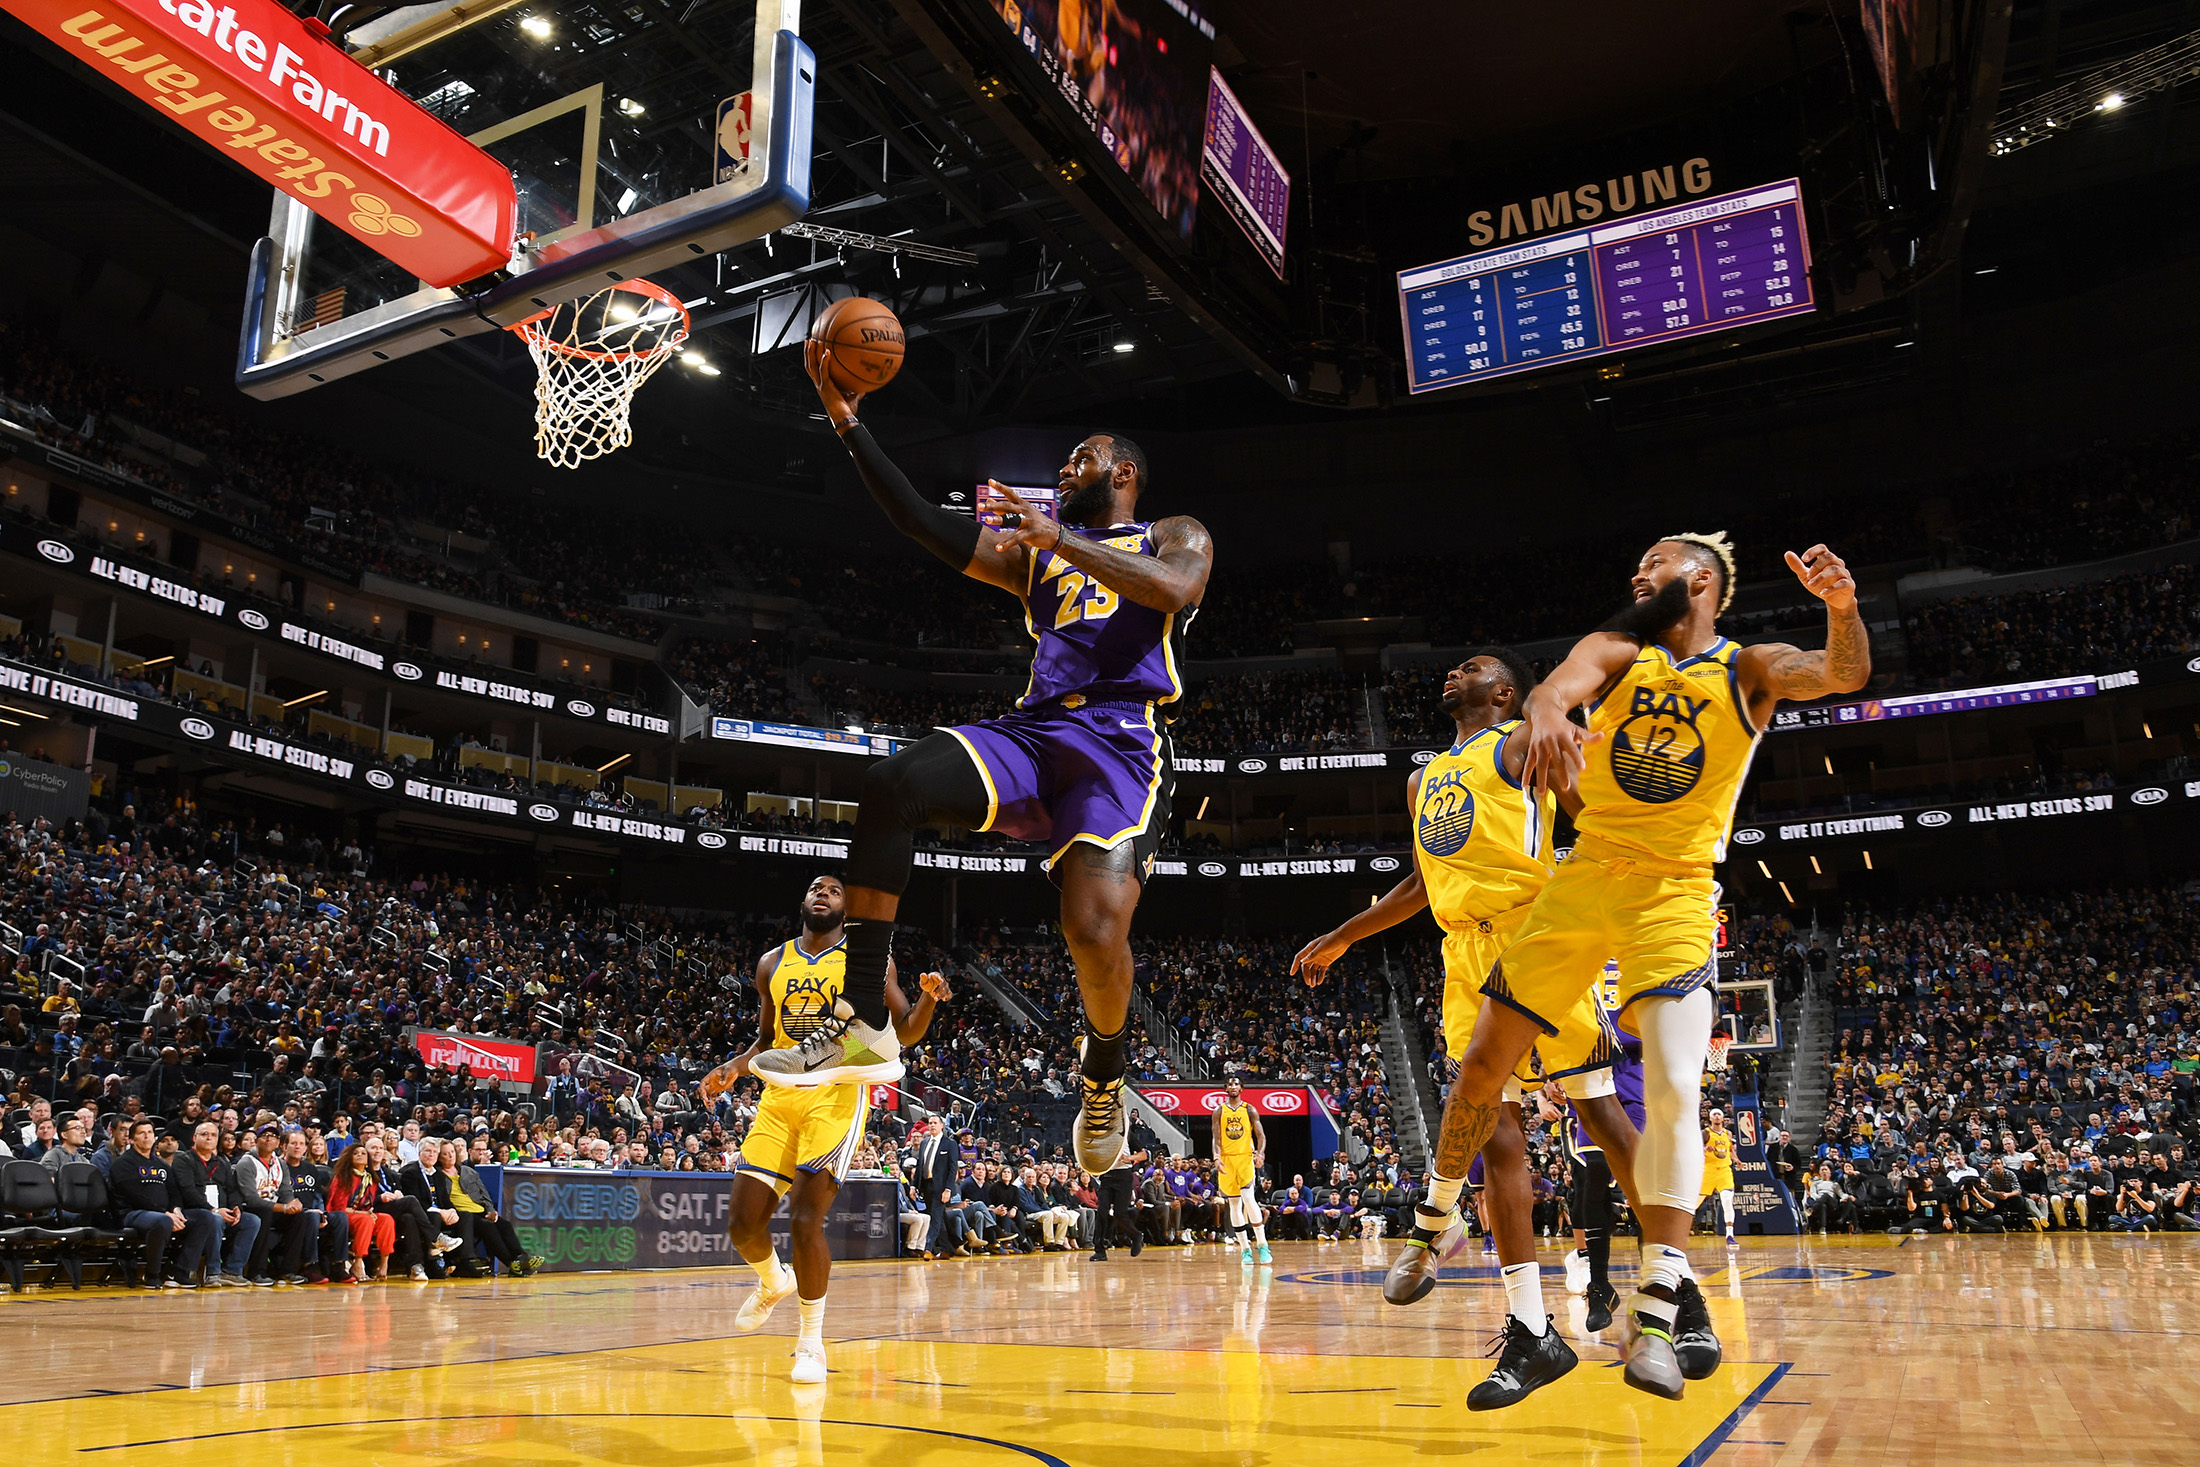 LeBron James of the Los Angeles Lakers dunks the ball during the